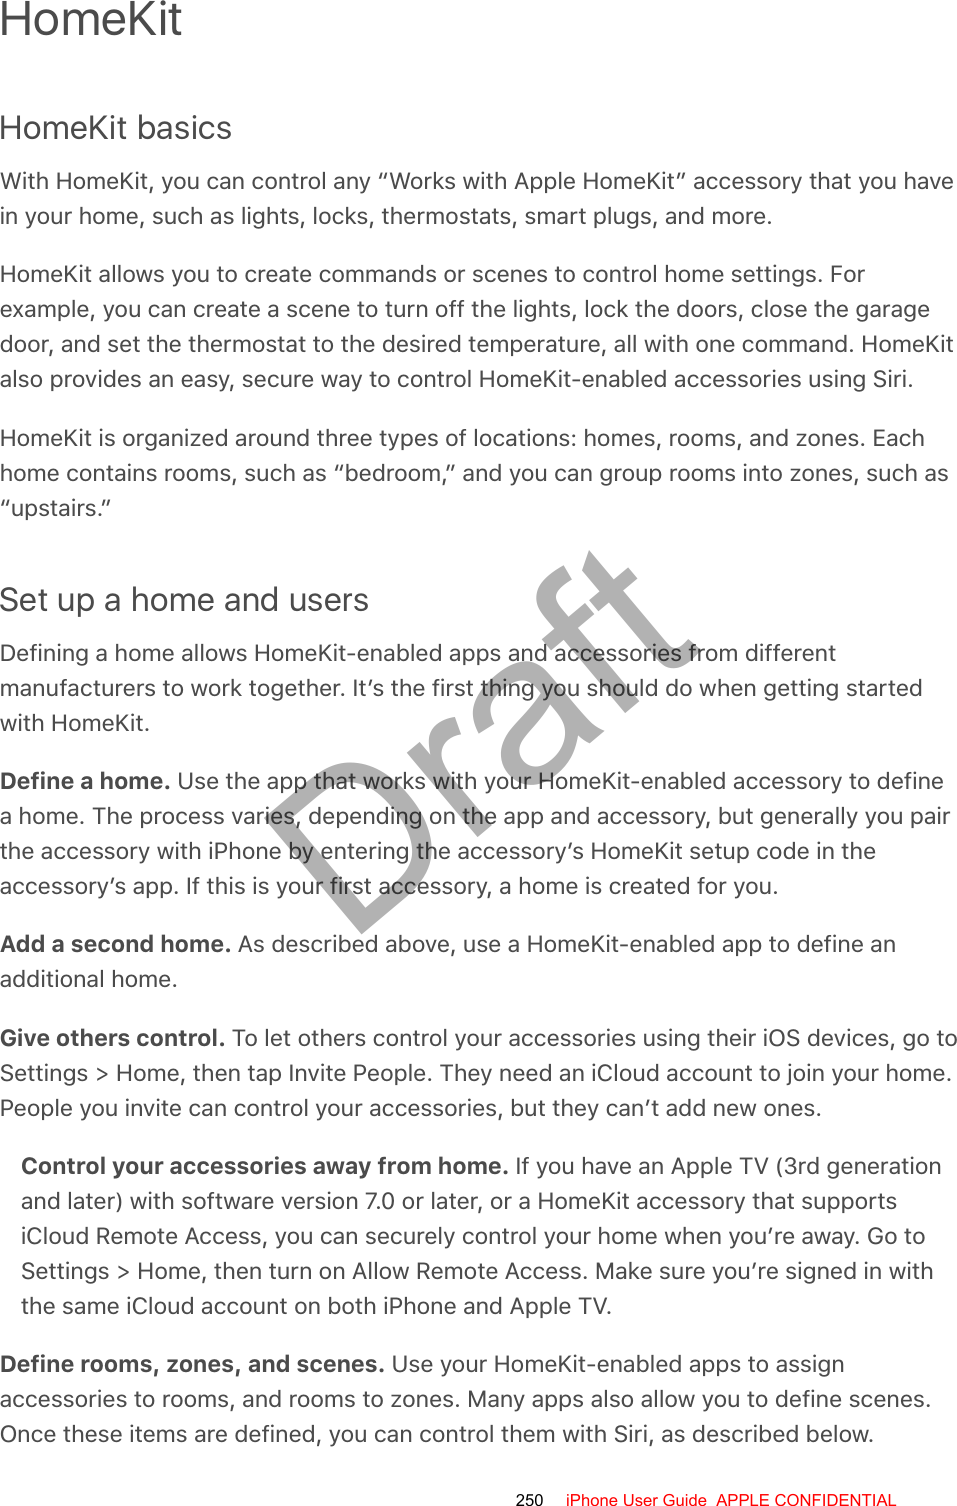 HomeKitHomeKit basicsWith HomeKit, you can control any “Works with Apple HomeKit” accessory that you havein your home, such as lights, locks, thermostats, smart plugs, and more.HomeKit allows you to create commands or scenes to control home settings. Forexample, you can create a scene to turn off the lights, lock the doors, close the garagedoor, and set the thermostat to the desired temperature, all with one command. HomeKitalso provides an easy, secure way to control HomeKit-enabled accessories using Siri.HomeKit is organized around three types of locations: homes, rooms, and zones. Eachhome contains rooms, such as “bedroom,” and you can group rooms into zones, such as“upstairs.”Set up a home and usersDefining a home allows HomeKit-enabled apps and accessories from differentmanufacturers to work together. It’s the first thing you should do when getting startedwith HomeKit.Define a home. Use the app that works with your HomeKit-enabled accessory to definea home. The process varies, depending on the app and accessory, but generally you pairthe accessory with iPhone by entering the accessory’s HomeKit setup code in theaccessory’s app. If this is your first accessory, a home is created for you.Add a second home. As described above, use a HomeKit-enabled app to define anadditional home.Give others control. To let others control your accessories using their iOS devices, go toSettings &gt; Home, then tap Invite People. They need an iCloud account to join your home.People you invite can control your accessories, but they can’t add new ones.Control your accessories away from home. If you have an Apple TV (3rd generationand later) with software version 7.0 or later, or a HomeKit accessory that supportsiCloud Remote Access, you can securely control your home when you’re away. Go toSettings &gt; Home, then turn on Allow Remote Access. Make sure you’re signed in withthe same iCloud account on both iPhone and Apple TV.Define rooms, zones, and scenes. Use your HomeKit-enabled apps to assignaccessories to rooms, and rooms to zones. Many apps also allow you to define scenes.Once these items are defined, you can control them with Siri, as described below.250 iPhone User Guide  APPLE CONFIDENTIALDraft